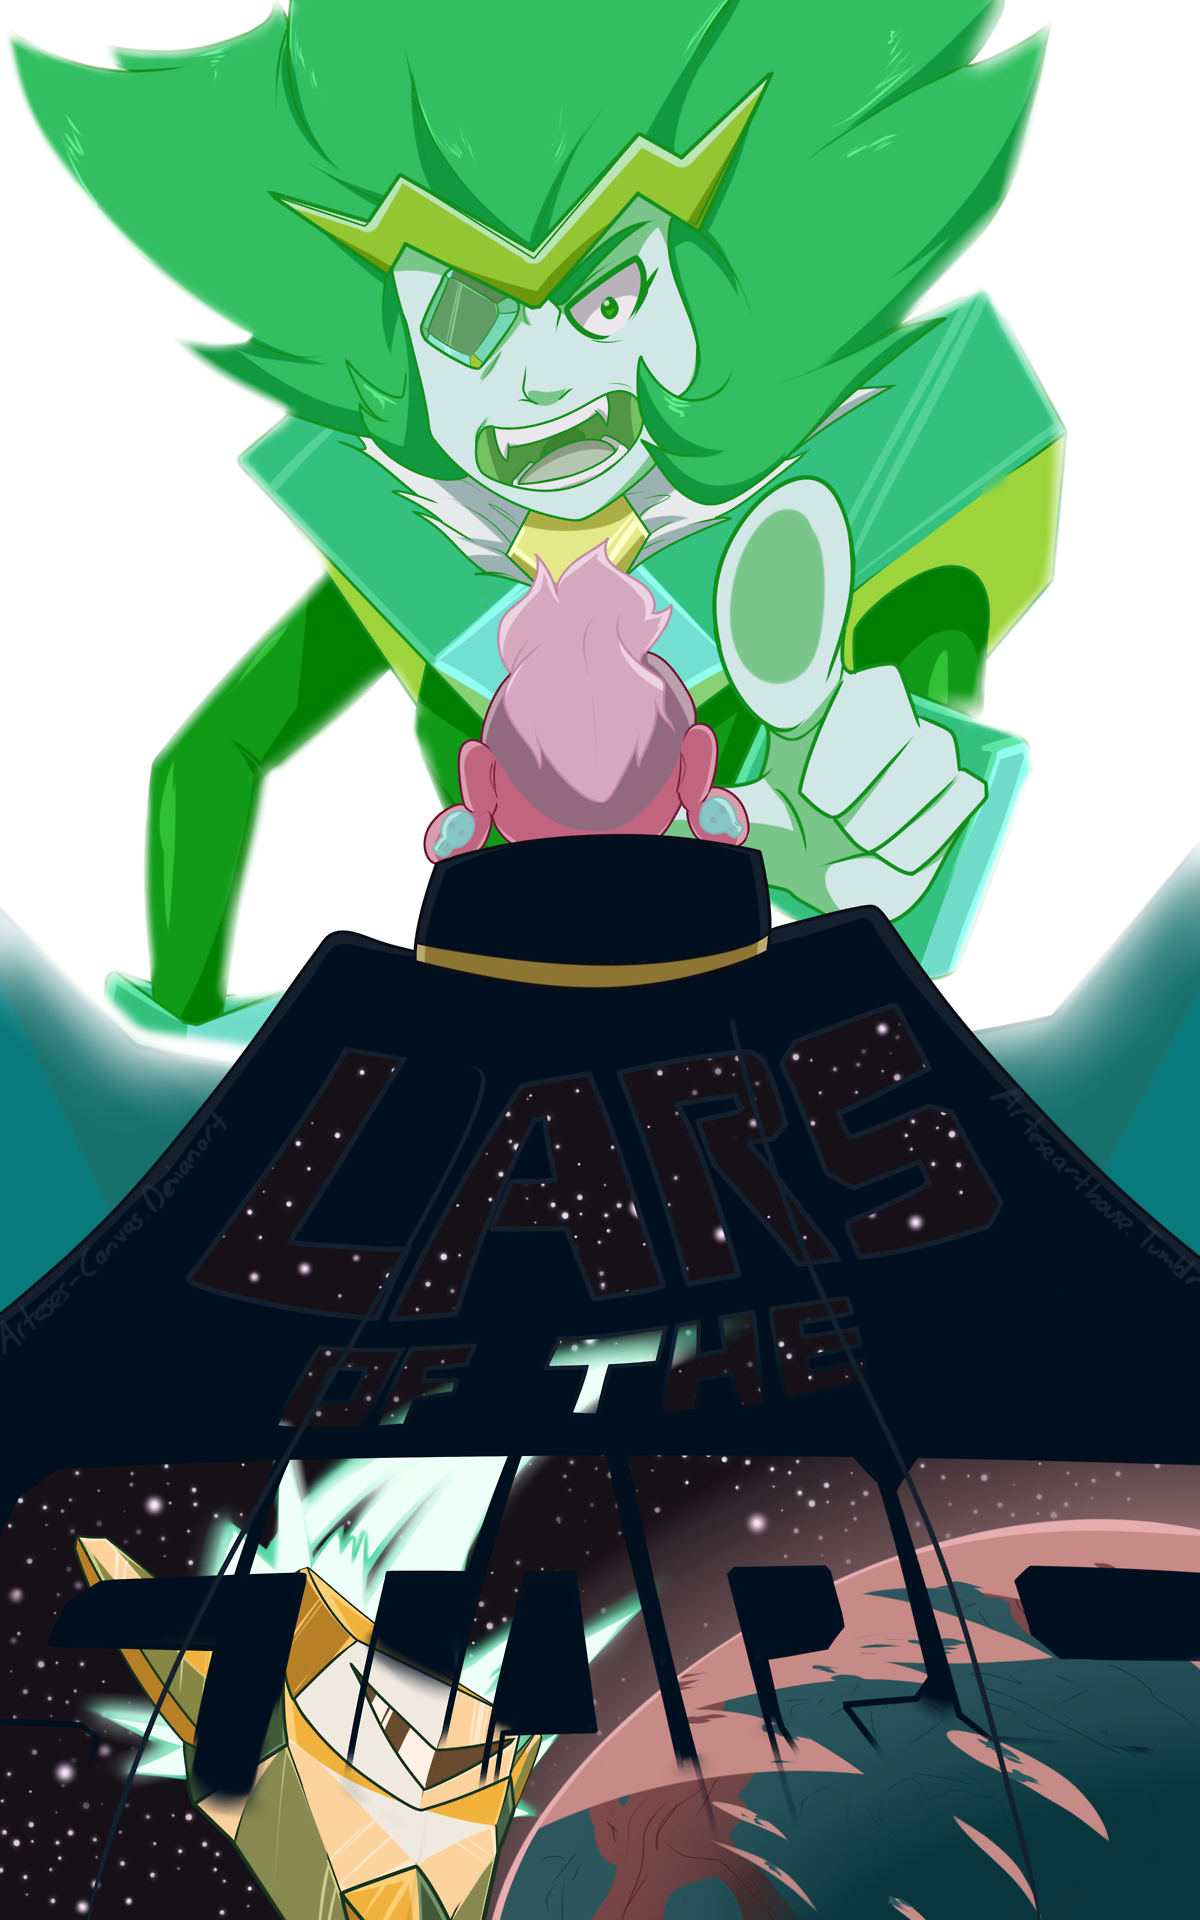 LARS OF THE STARS! decided to do some fan art of the stranded special, first of lars of the stars and my favorite space captain! c: i loved this special, that ep reminded my of like star trekness and...